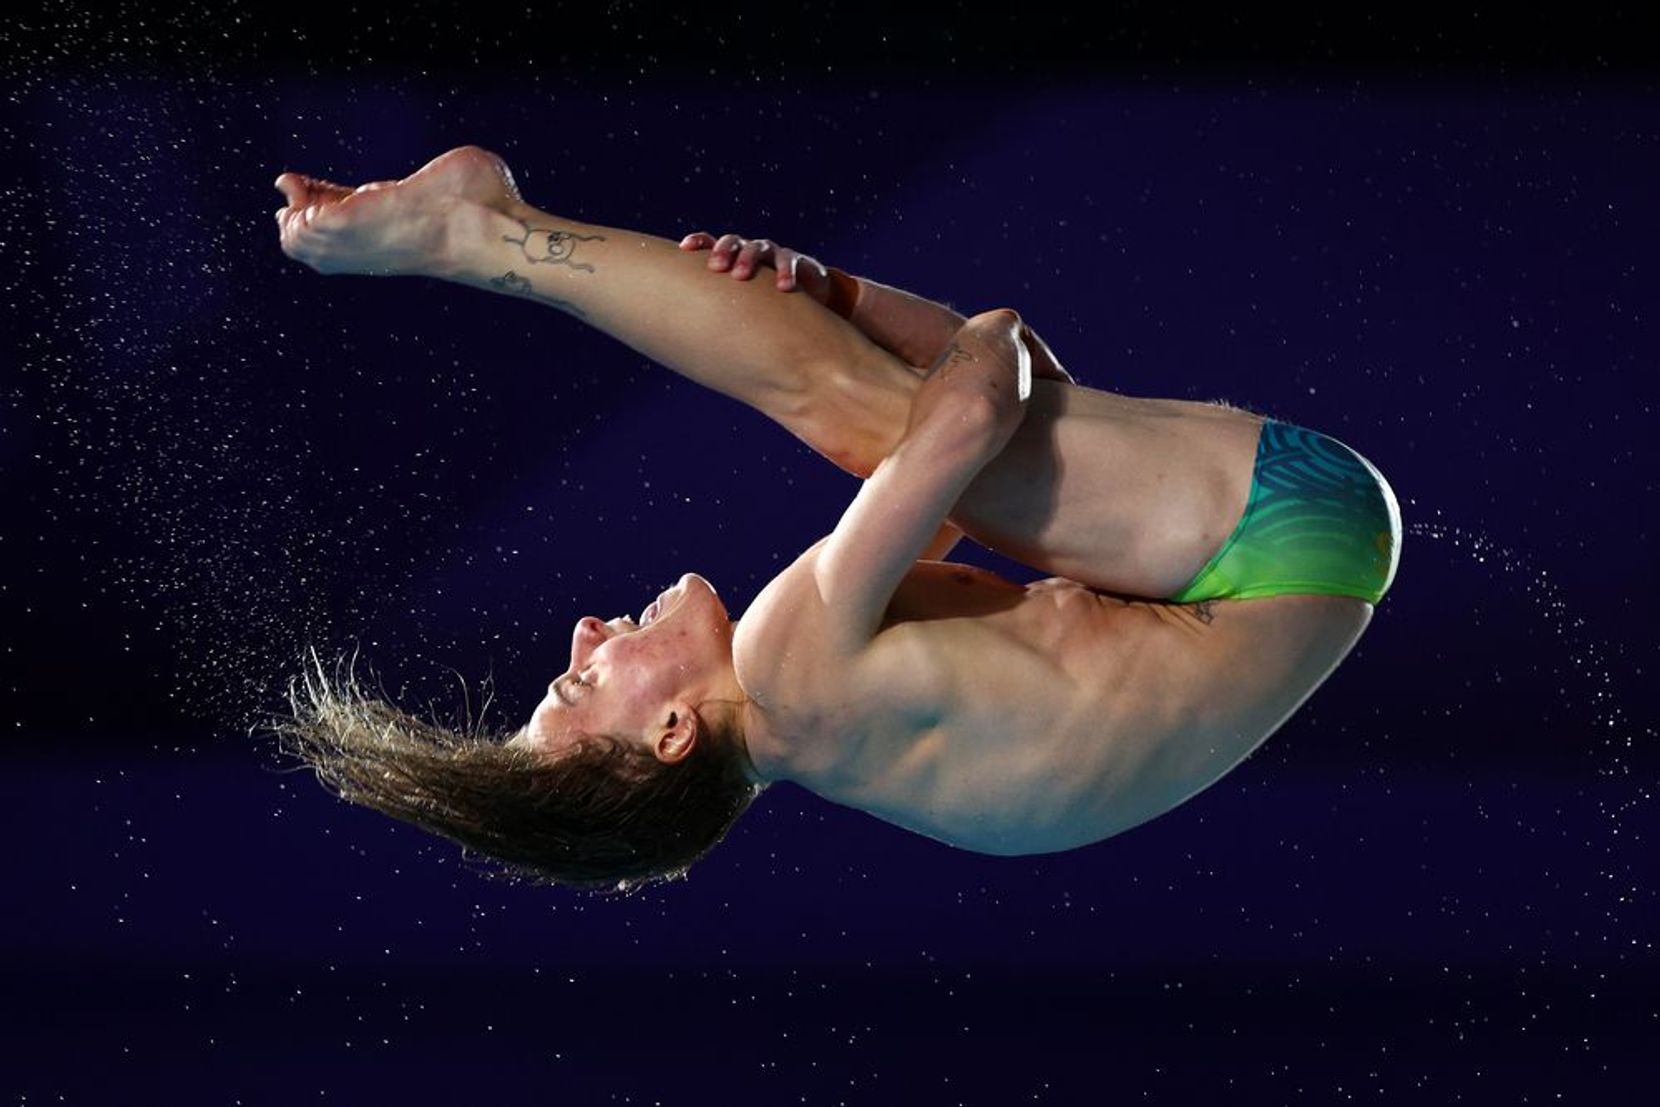 Australia's Cassiel Rousseau scores 103.90 with final dive to win Gold at Commonwealth Games